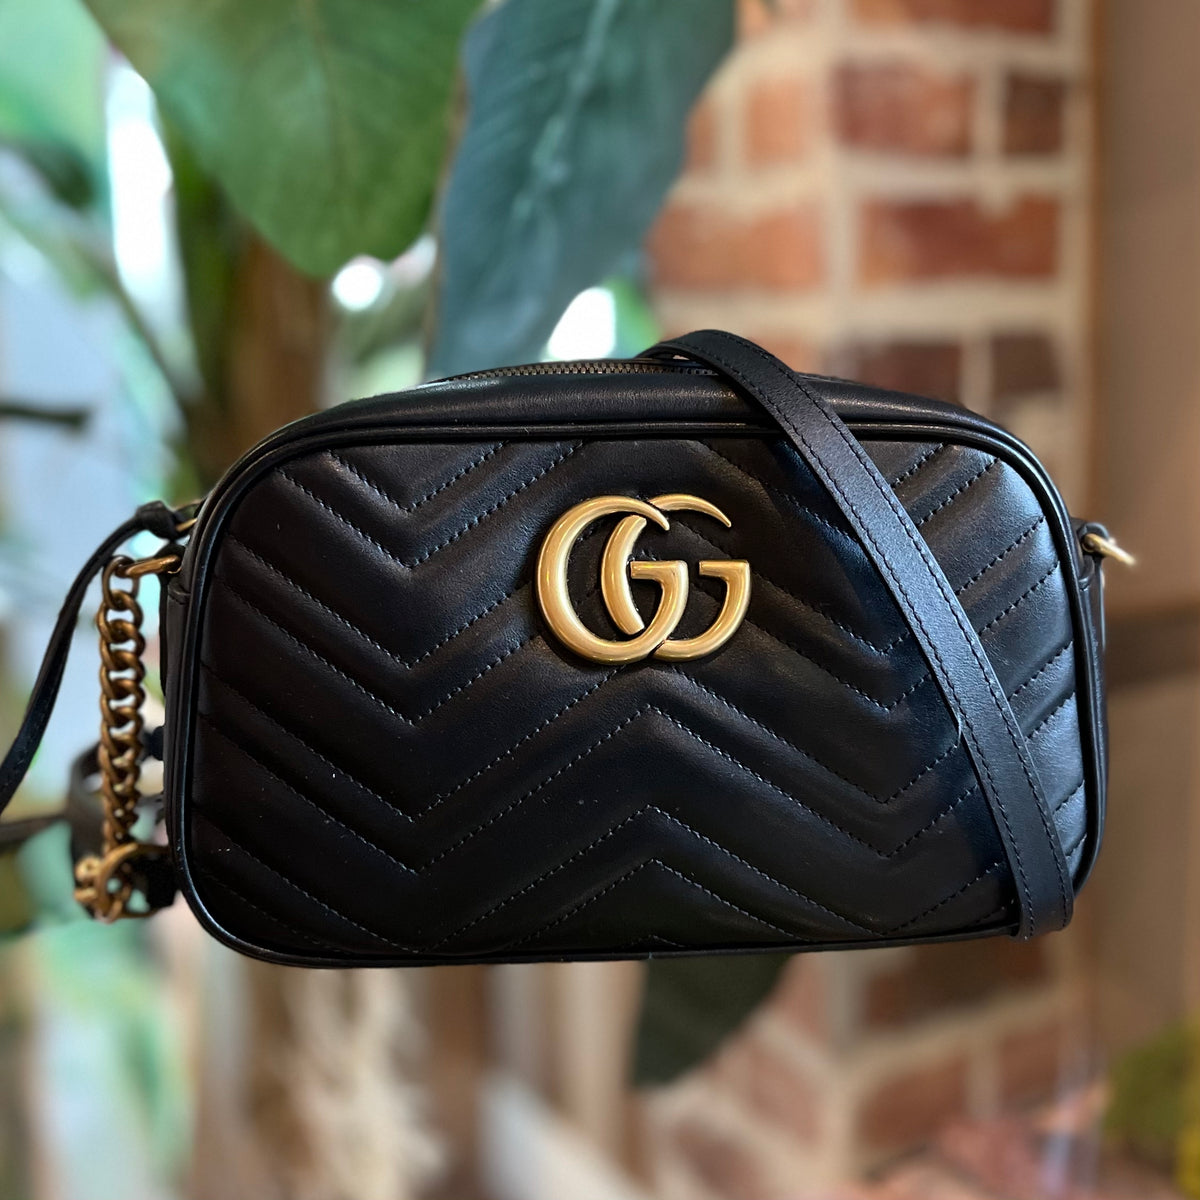 Gucci - GG Marmont Leather Cross-body Bag - Womens - Black